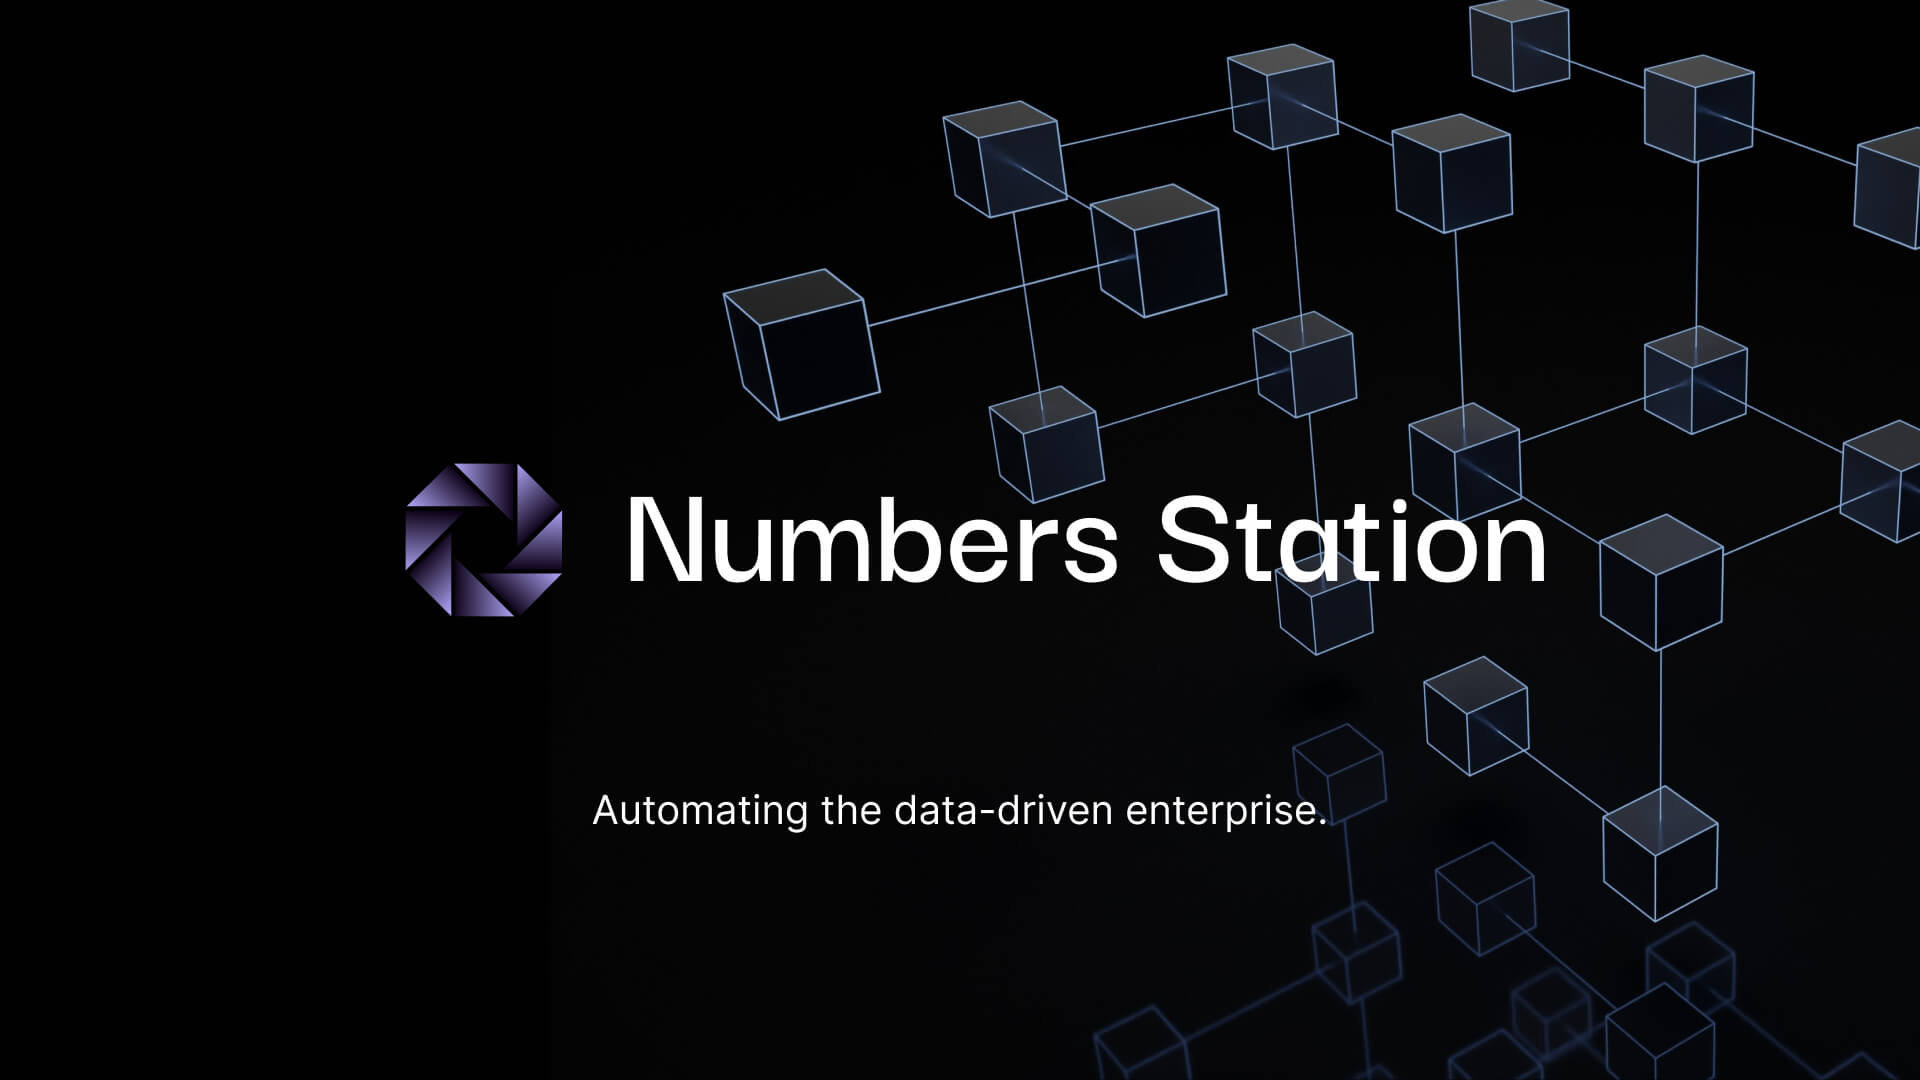 numbers-station-revolutionizes-data-analytics-with-new-cloud-based-product